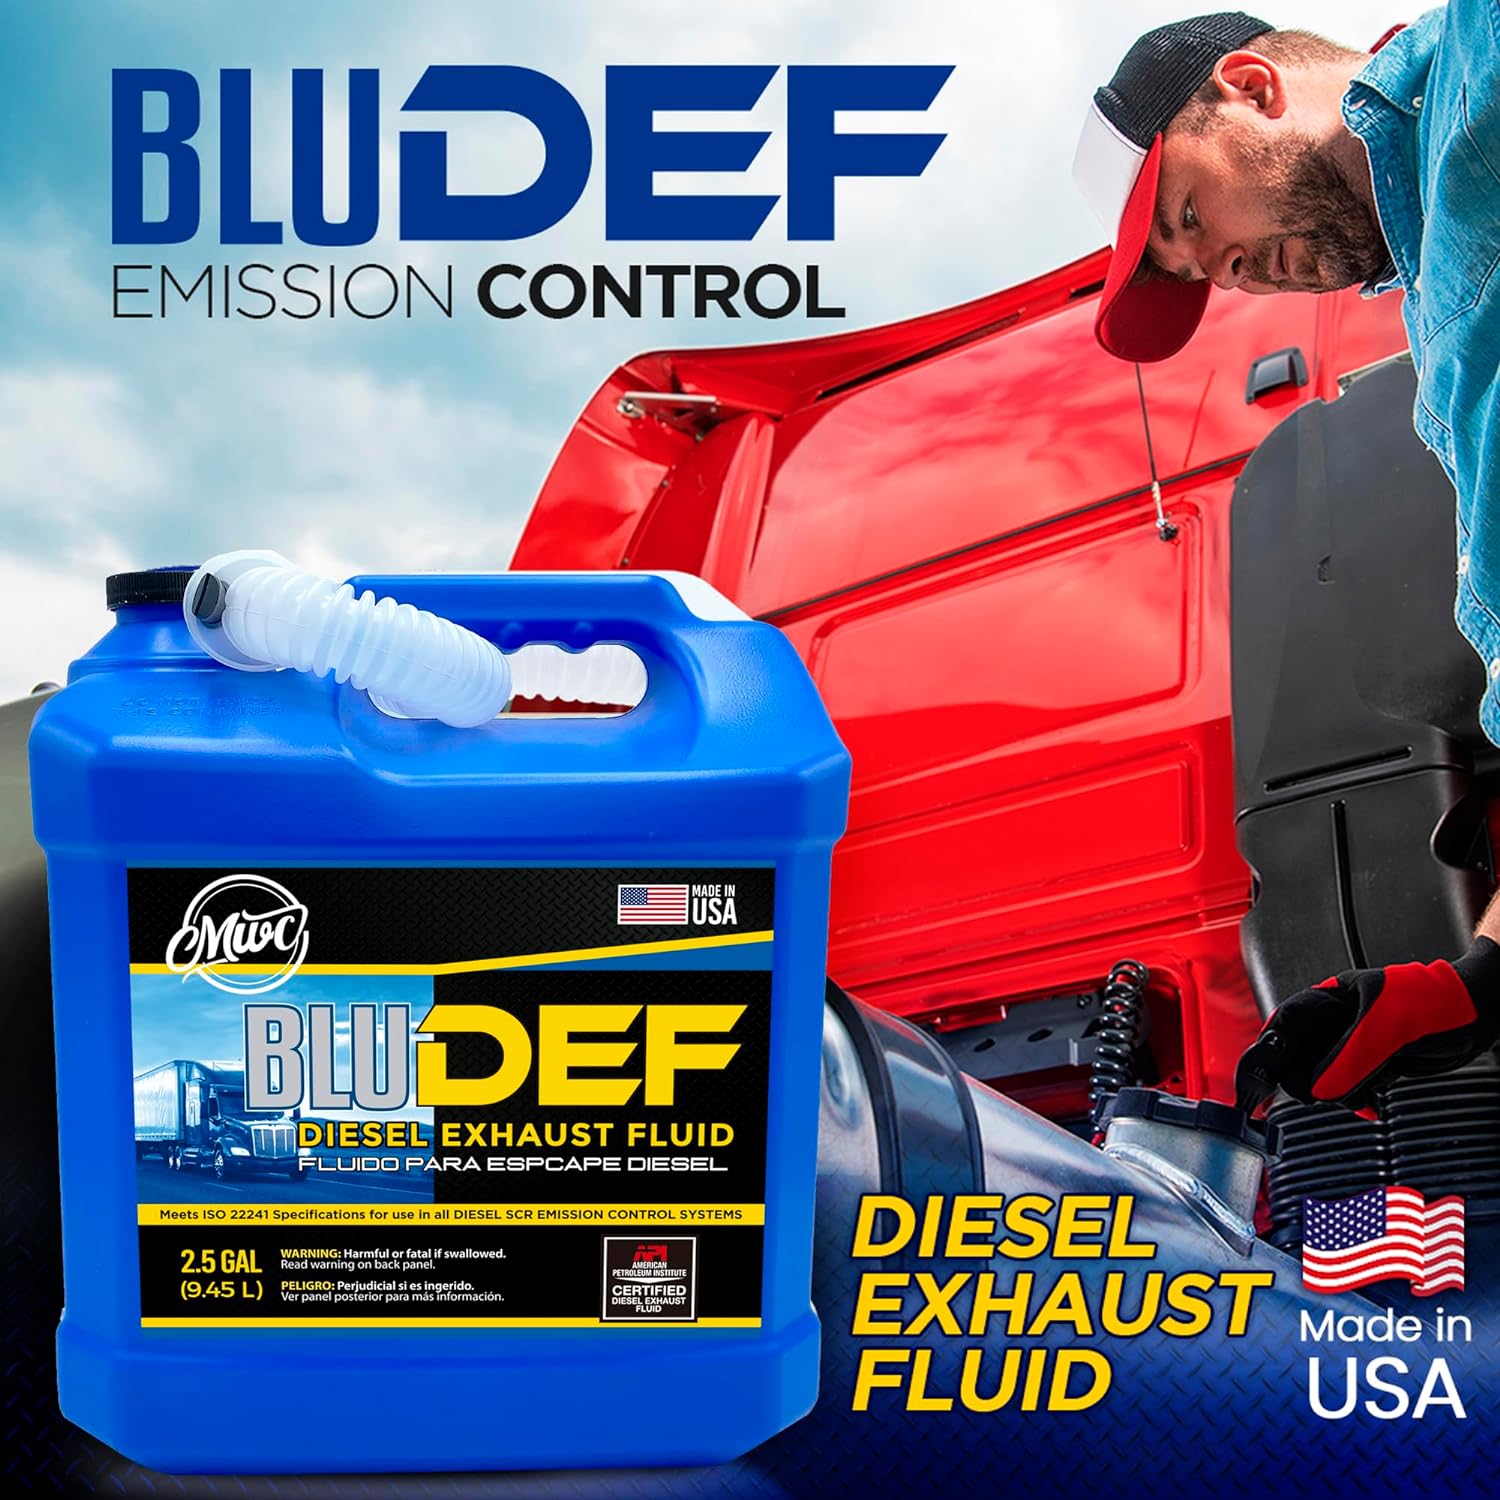 Diesel Exhaust Fluid (DEF) is a consumable and essential fluid for maintaining Selective Catalytic Reduction (SCR)-equipped modern diesel engines.